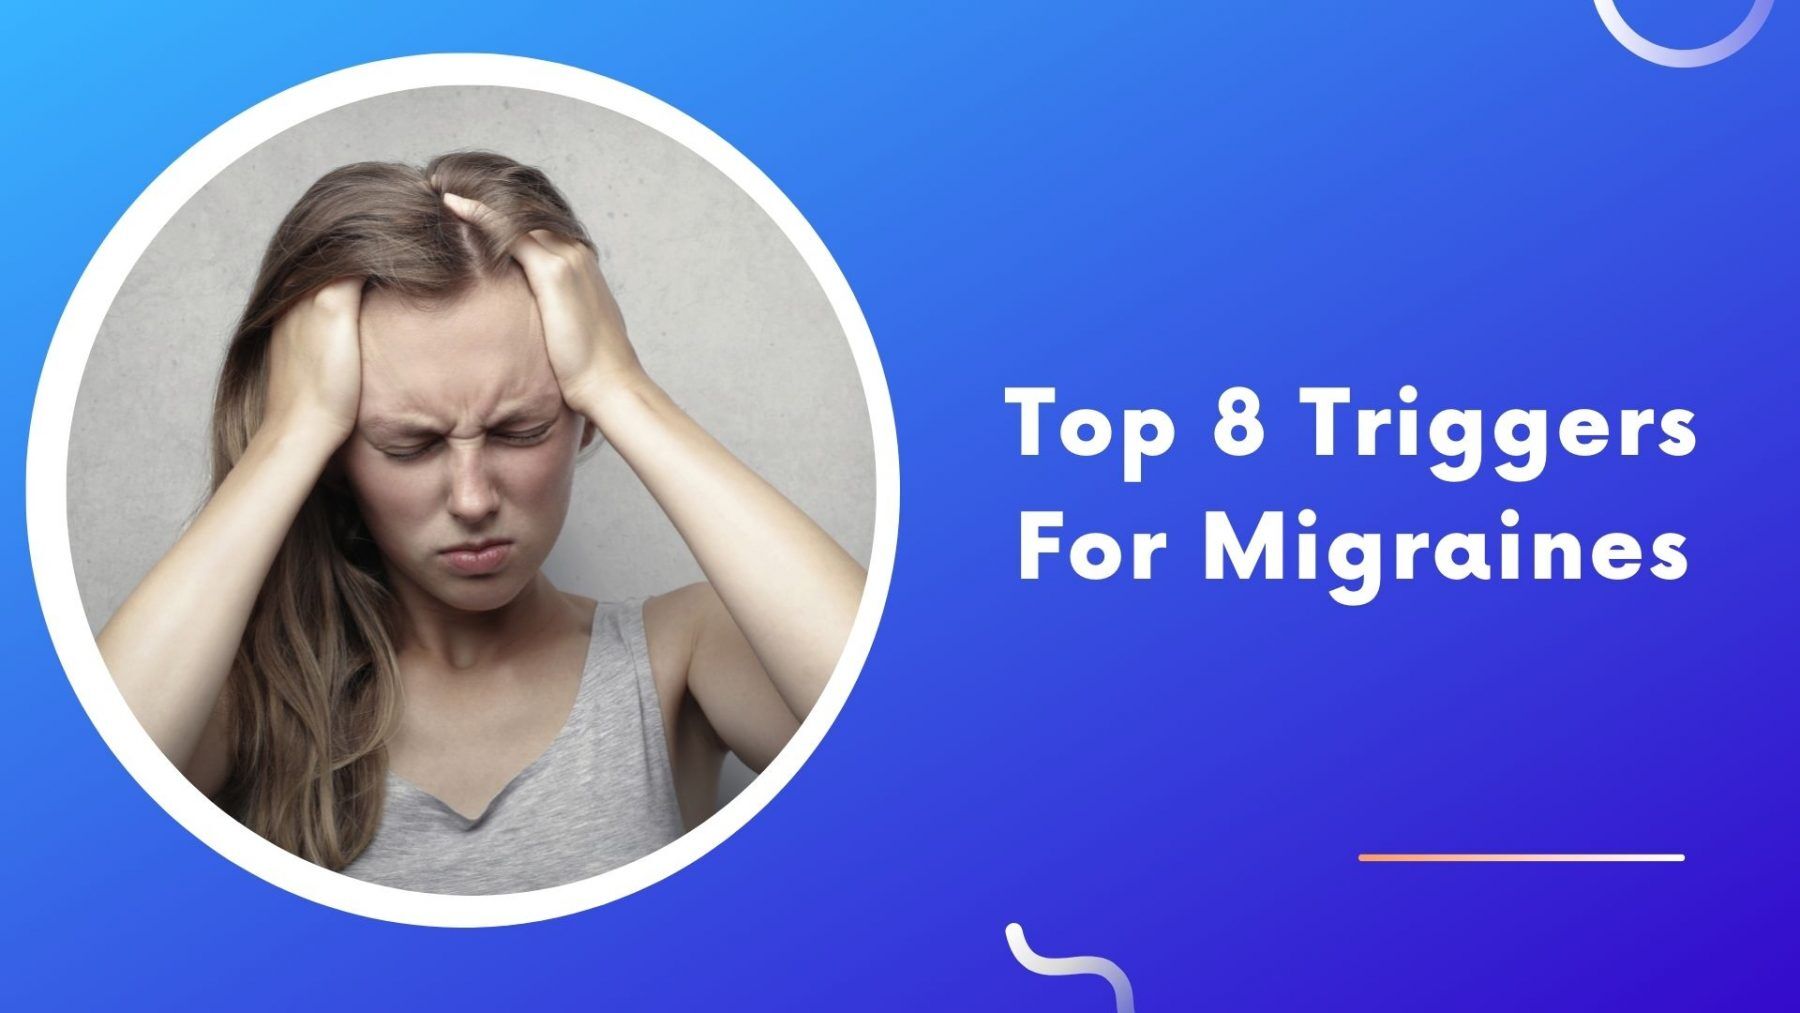 Top 8 Triggers For Migraines